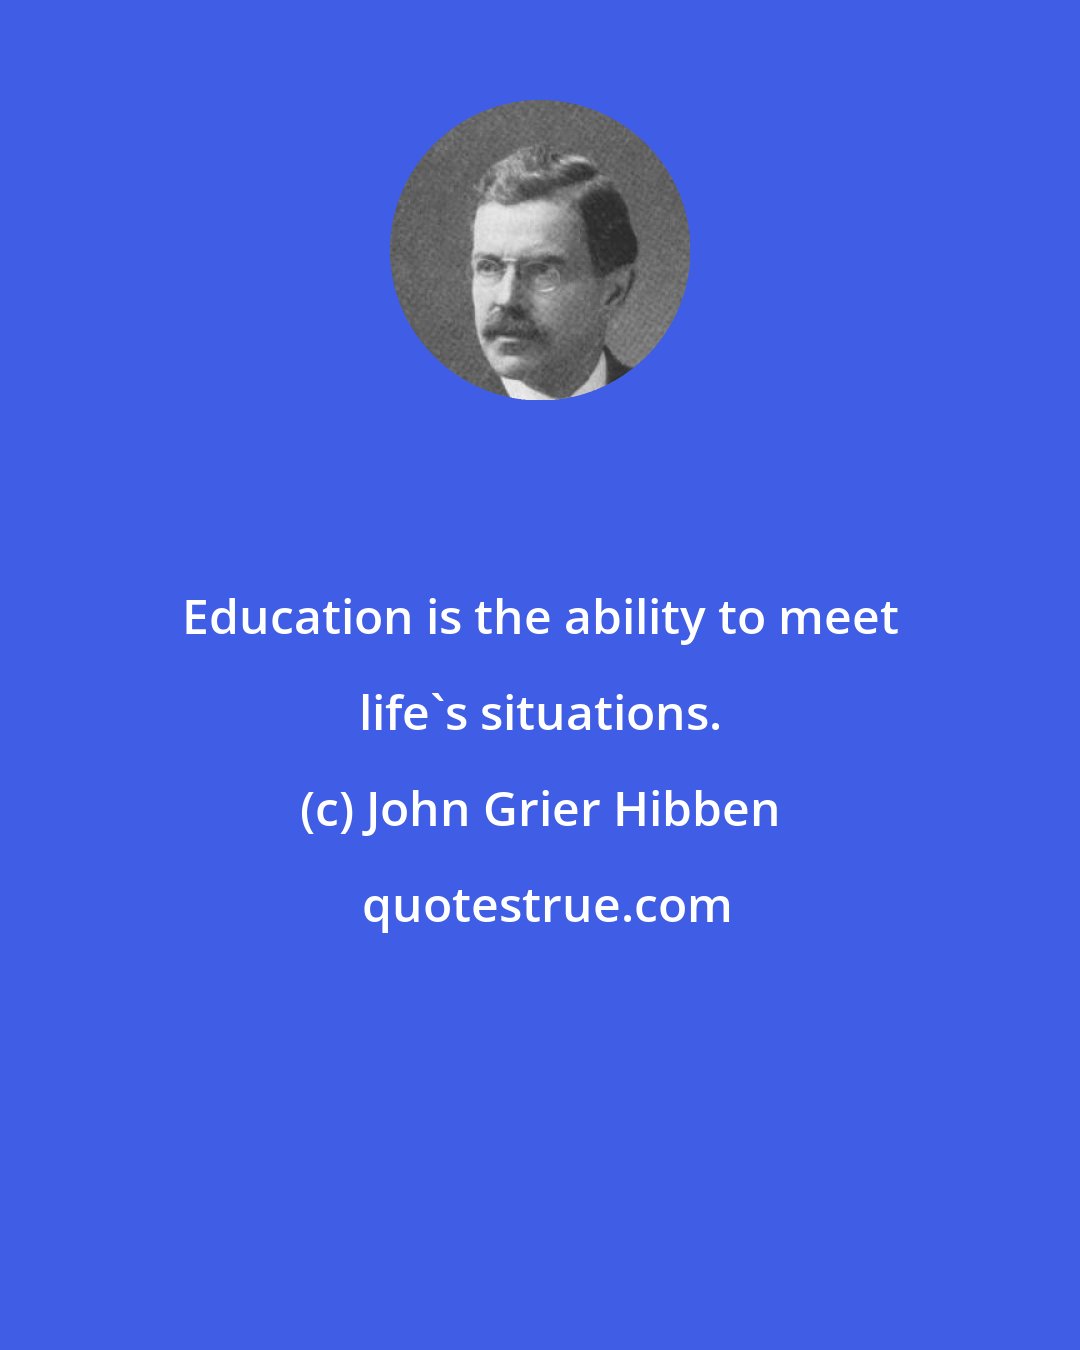 John Grier Hibben: Education is the ability to meet life's situations.